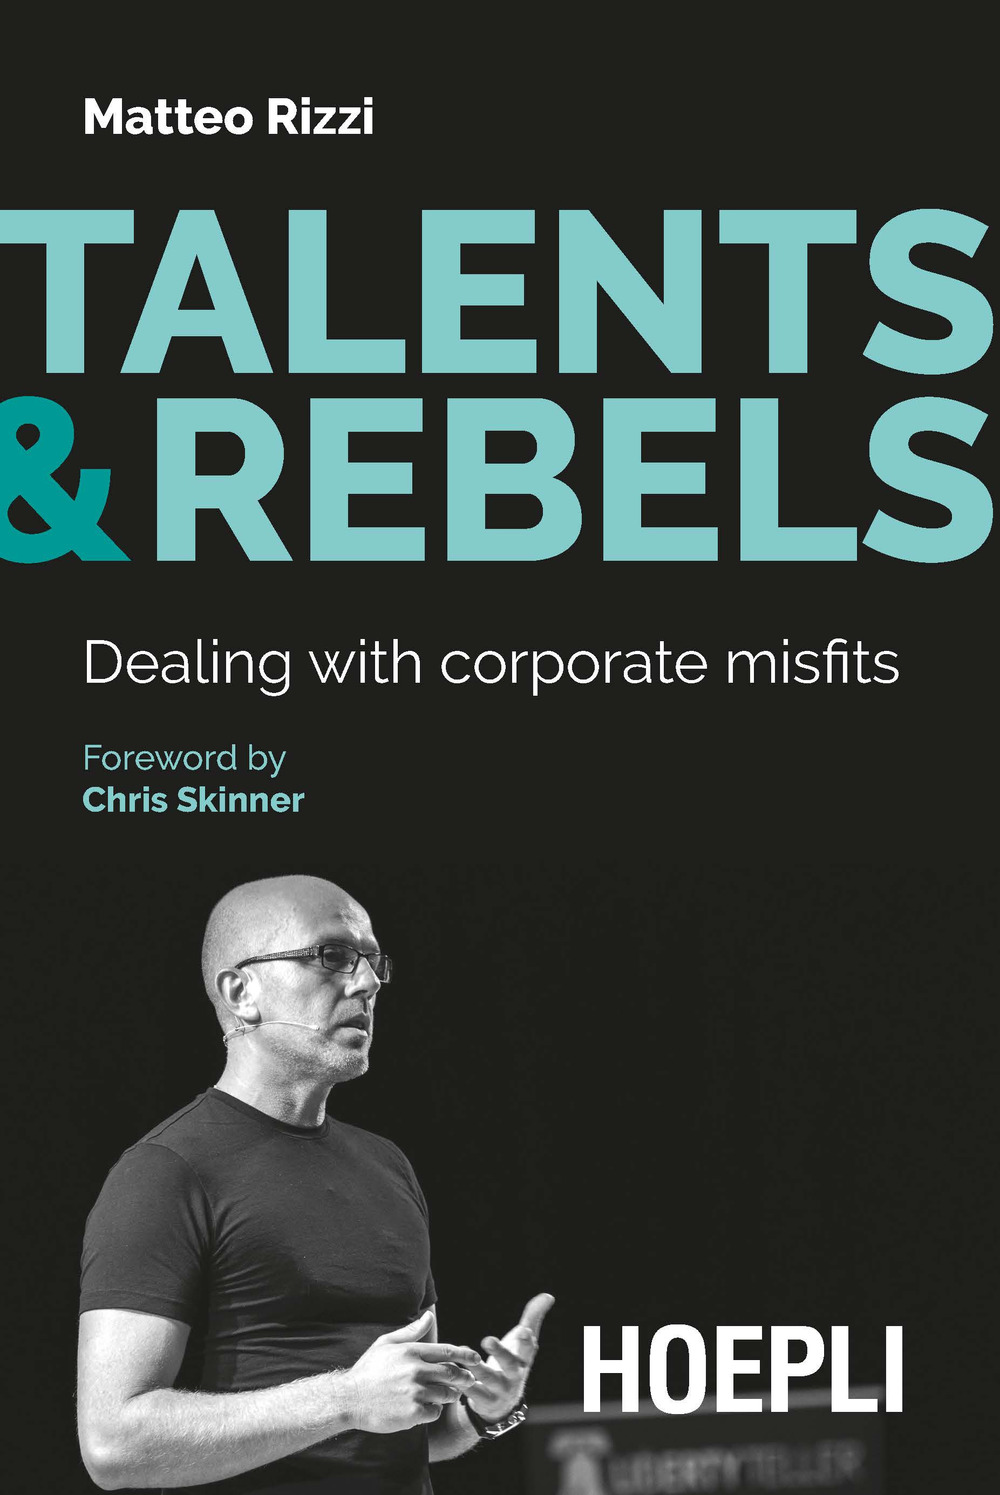 Talents & rebels. Dealing with corporate misfits